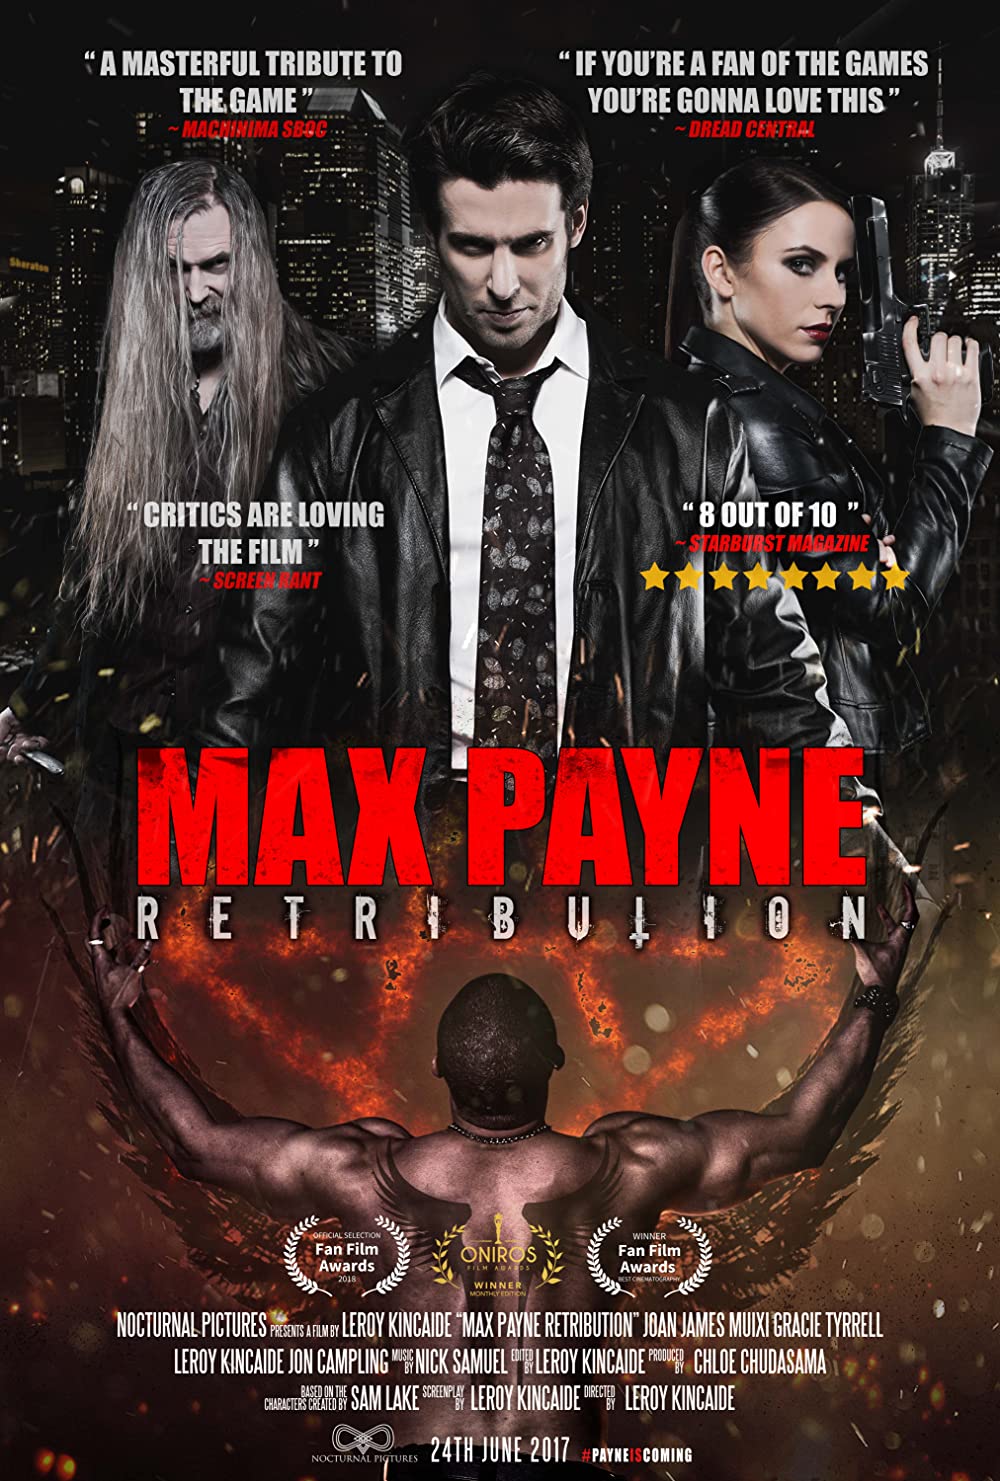 max payne retribution - "A Masterful Tribute To The Game" Macninima Sbog "If You'Re A Fan Of The Games You'Re Gonna Love This" Dread Central Perlow "Critics Are Loving The Film Scressant '8 Out Of 10' Starburst Magazine Max Payn 1 Retribution Official Sel